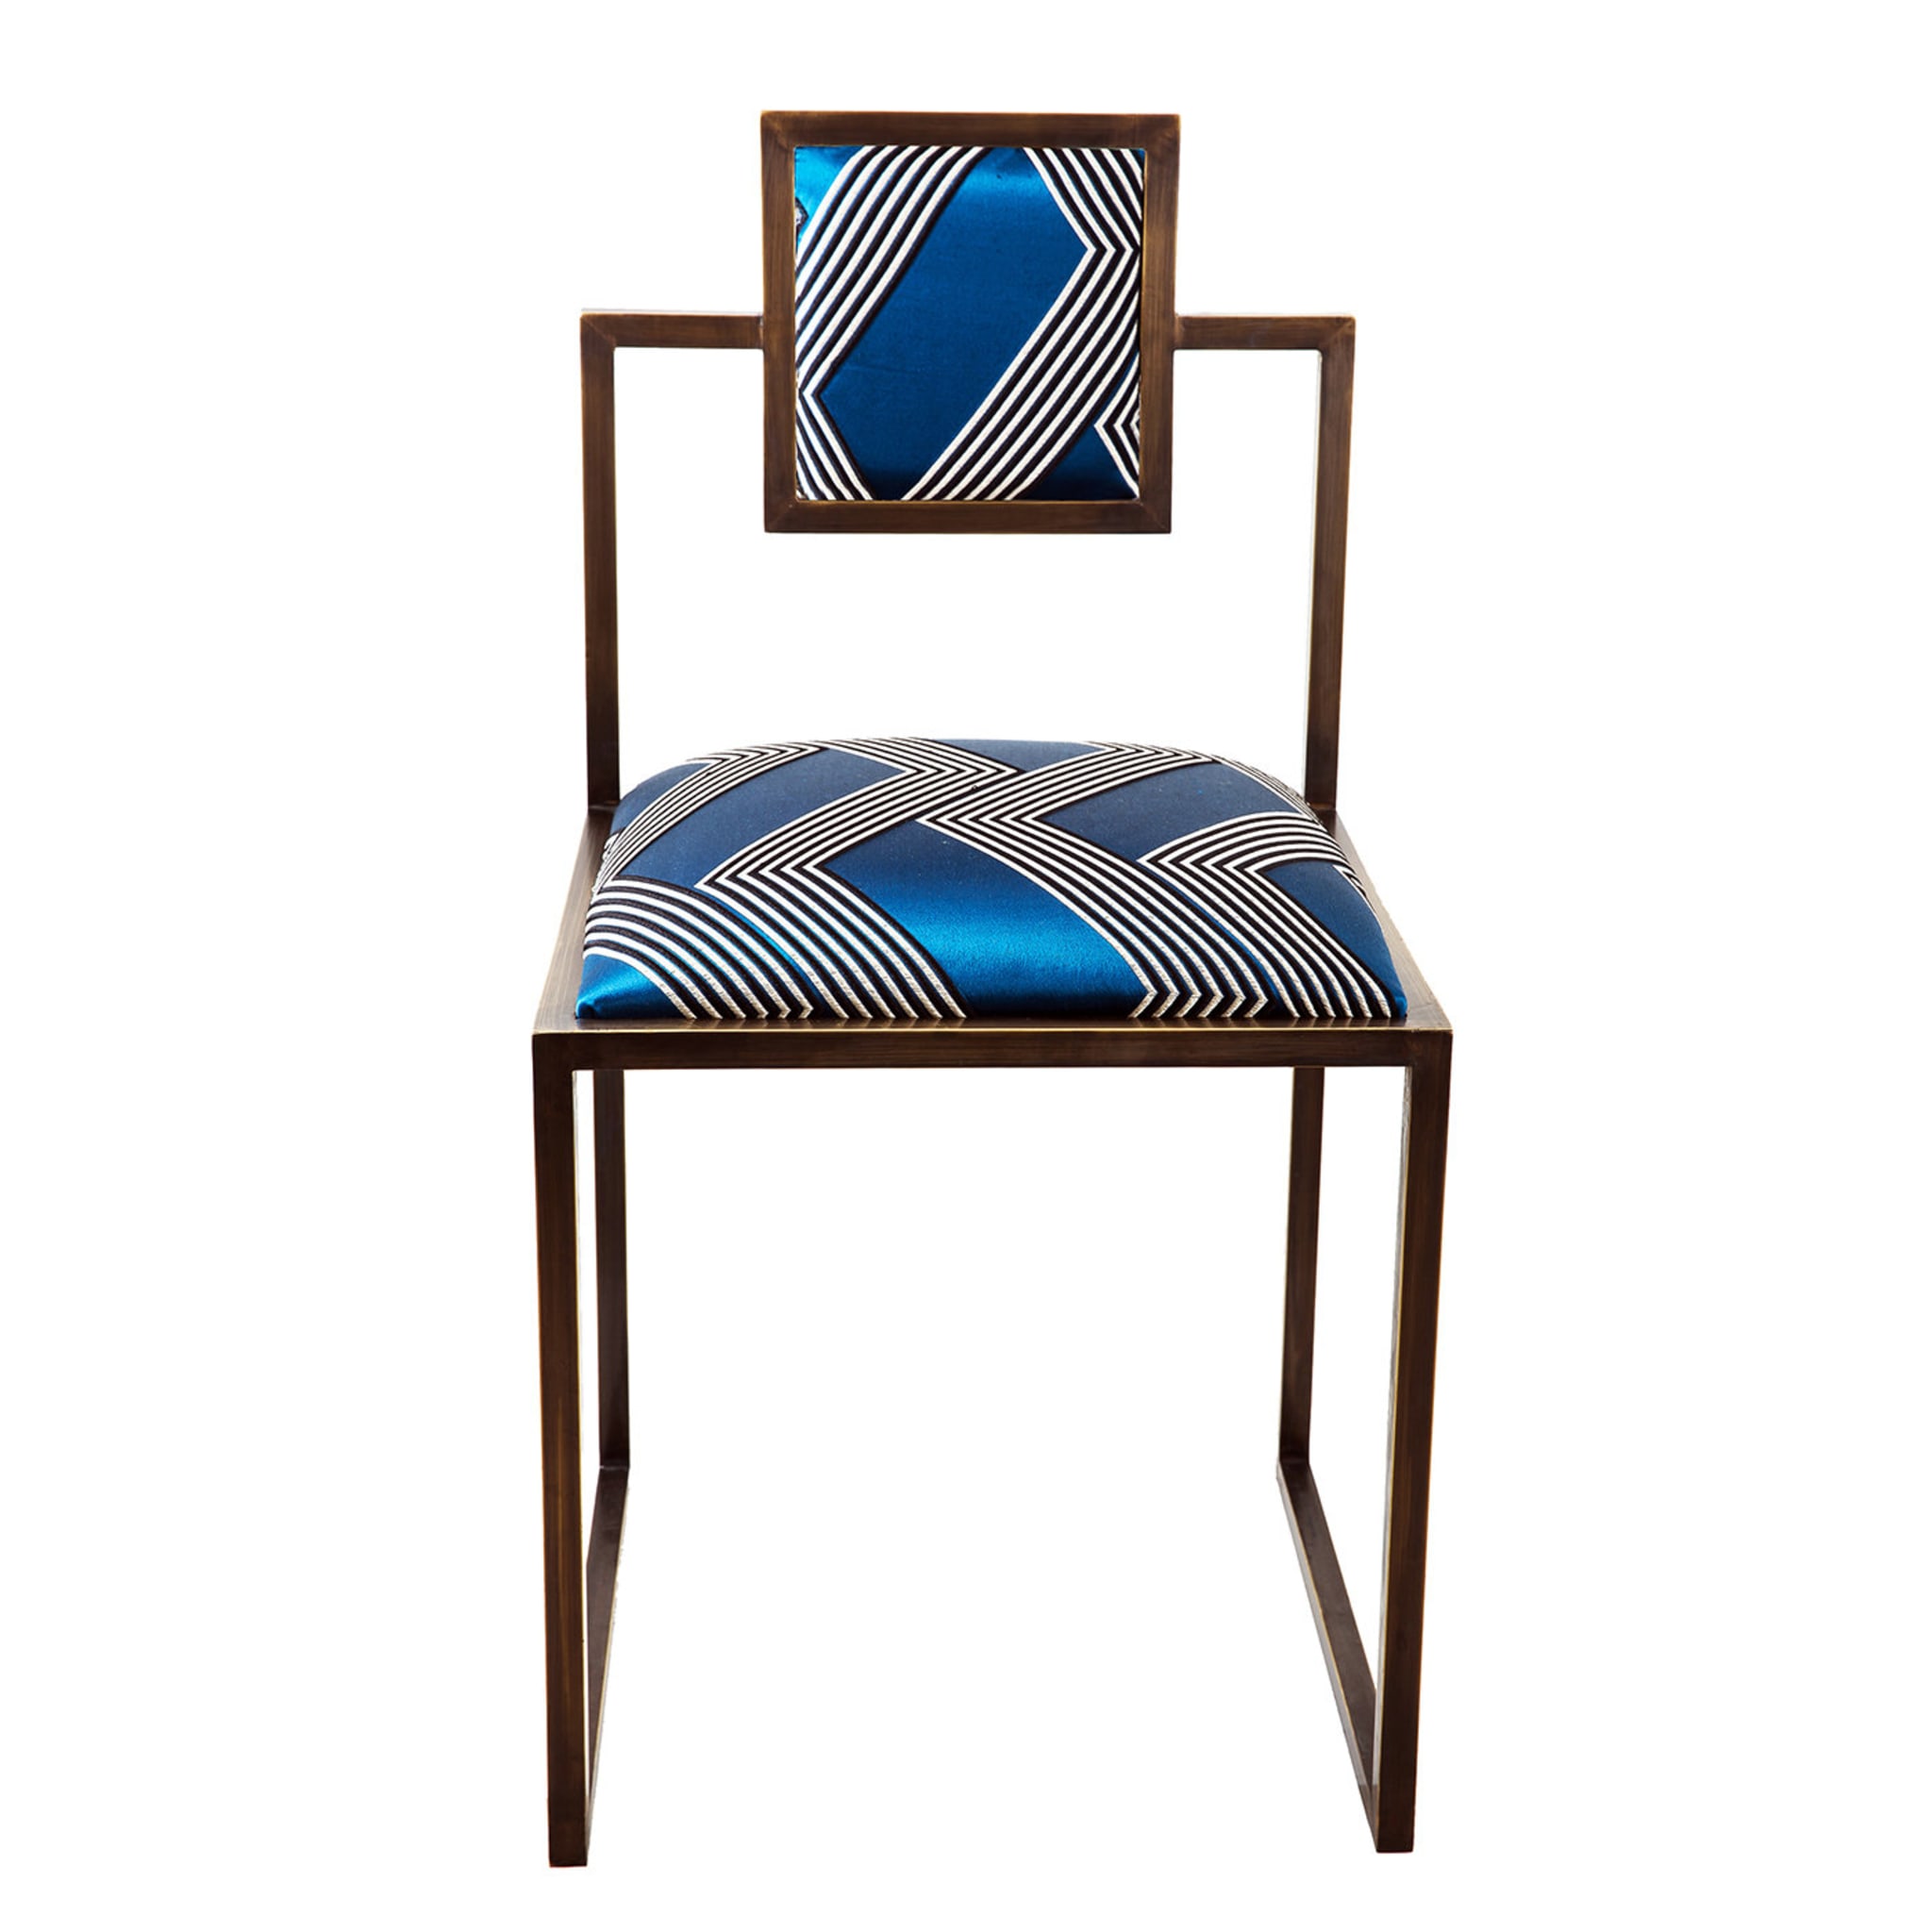 Funky Stripes Brass Square Chair - Main view